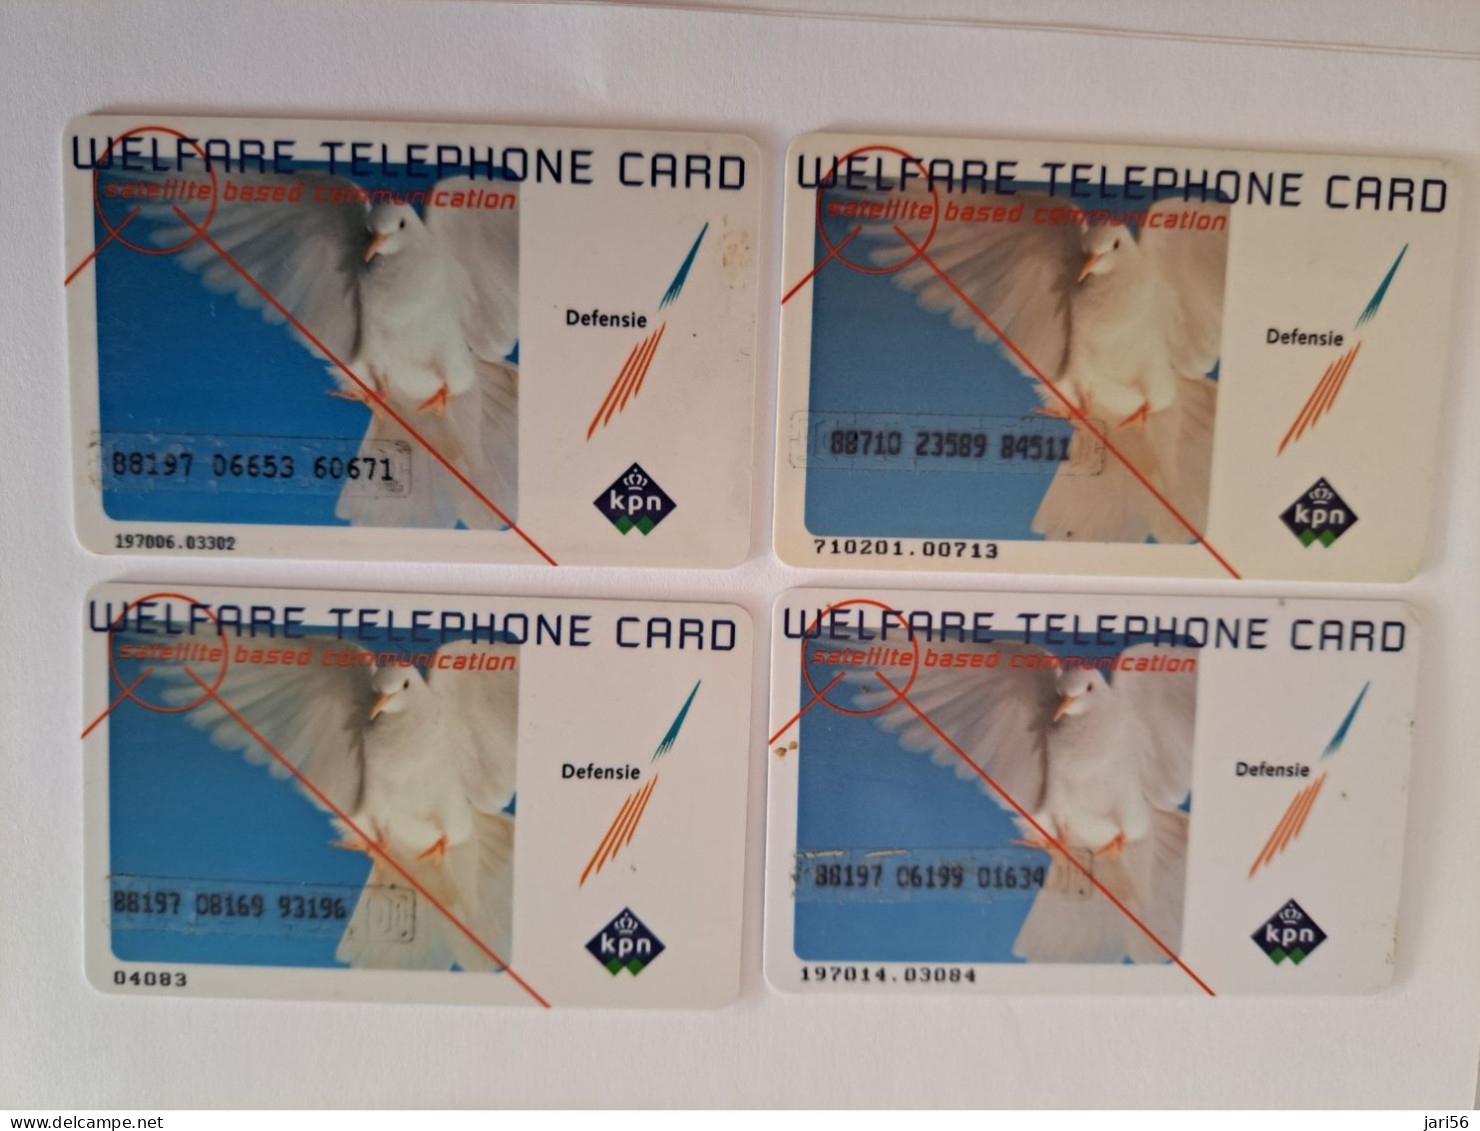 NETHERLANDS/ PREPAID/  HFL 25,- 4 CARDS/PIGEON  / WELFARE/ MILITAIRE CARDS/QUARTED / COMPLETE   - USED CARD  ** 13944** - Schede GSM, Prepagate E Ricariche